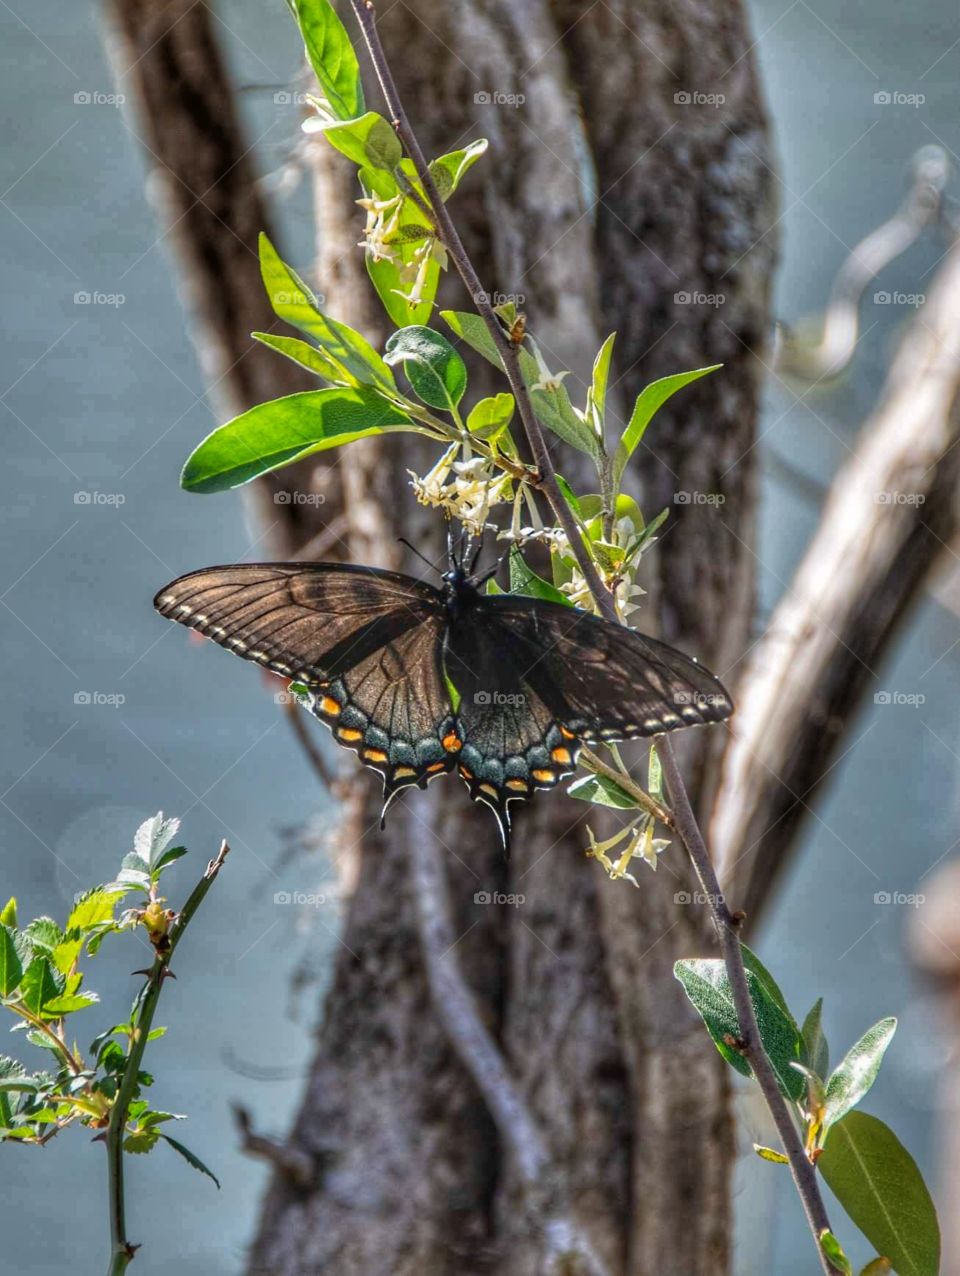 Butterfly on the bank of the beautiful Big Piney River in the Ozarks.